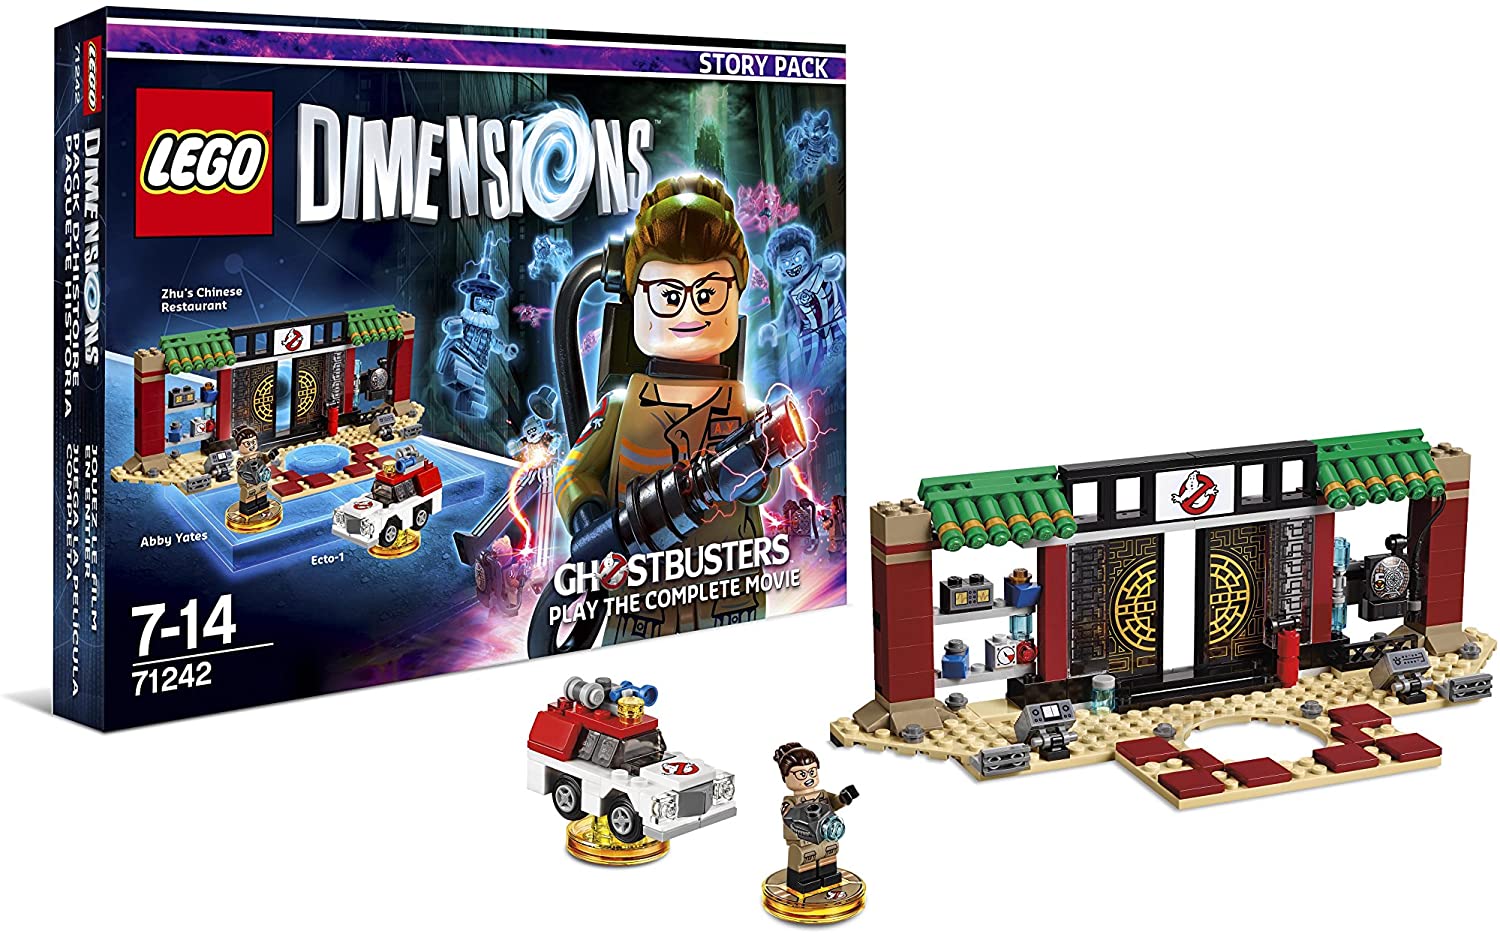 LEGO Dimensions - Story Pack (71242) - New Ghostbusters